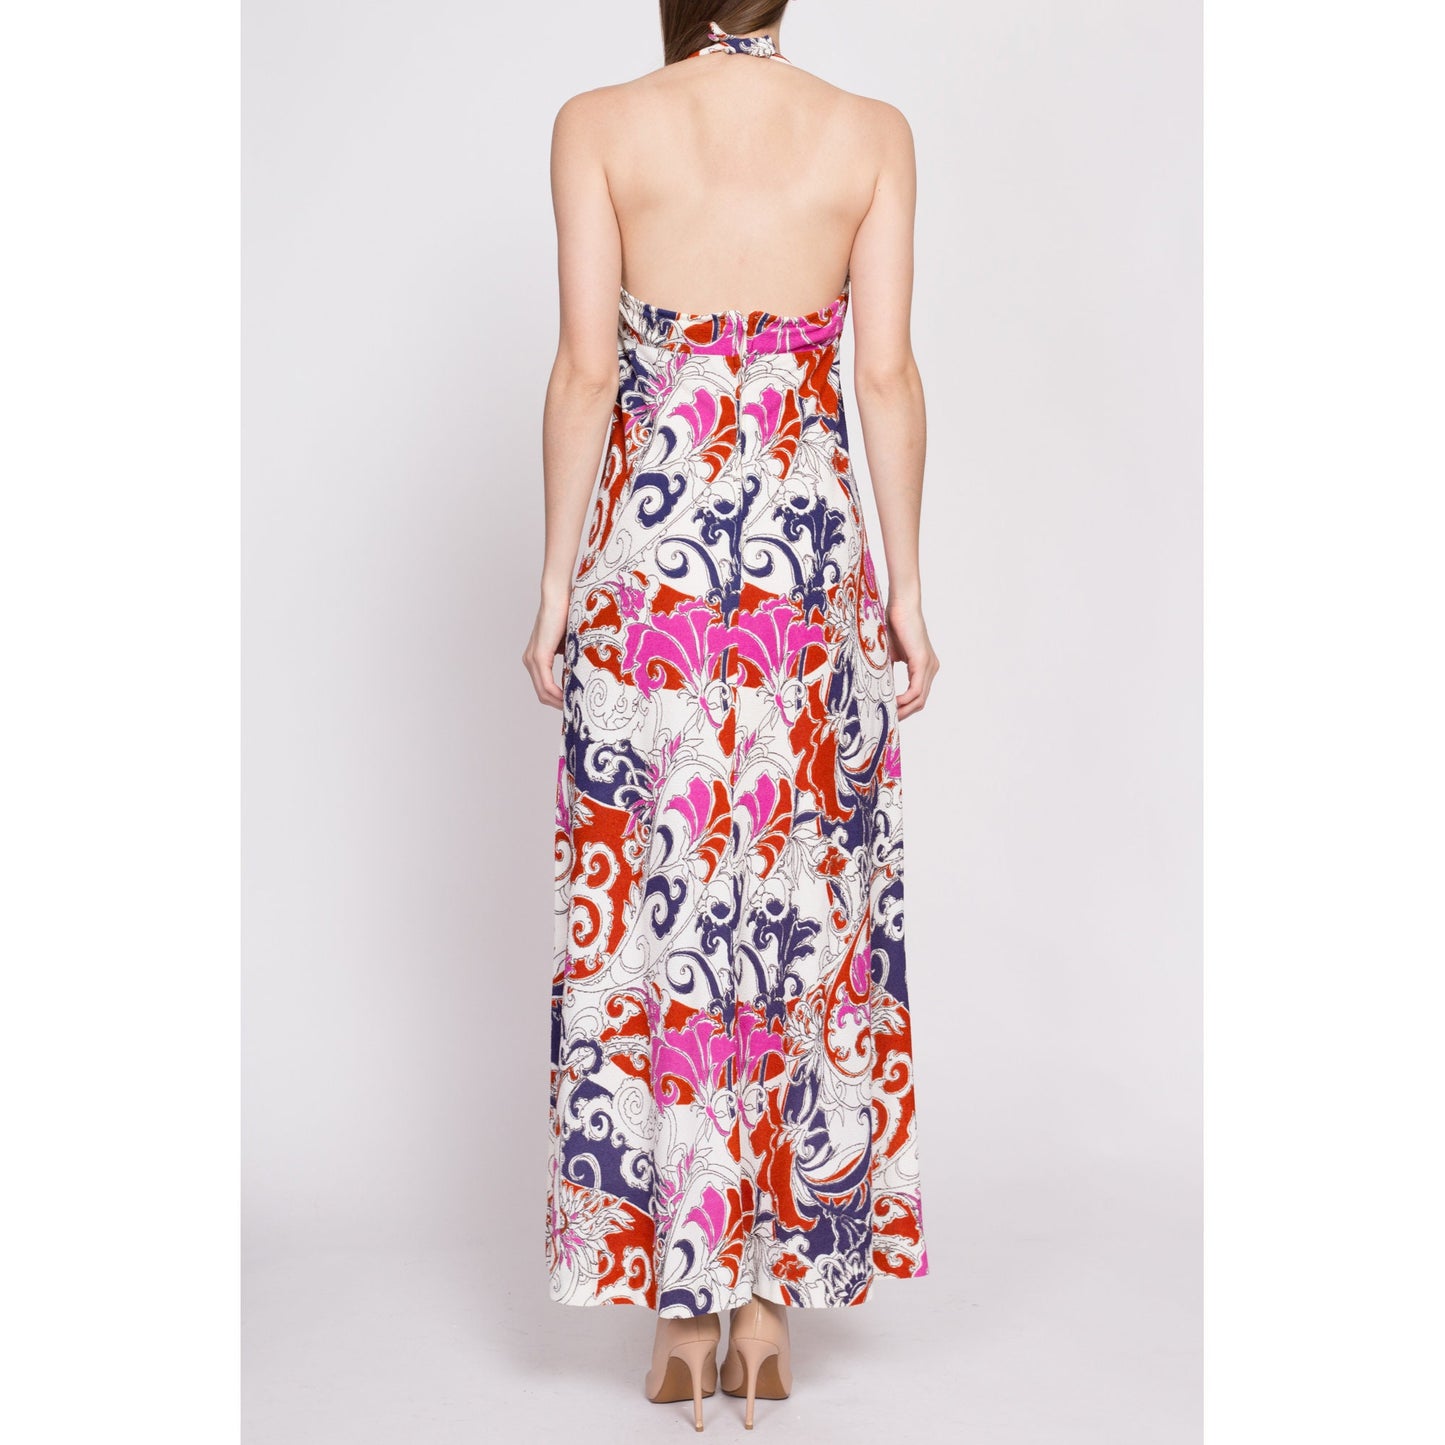 70s Psychedelic Trumpet Flower Print Halter Maxi Dress - XS to Small | Vintage Boho Floral Backless Towel Sundress